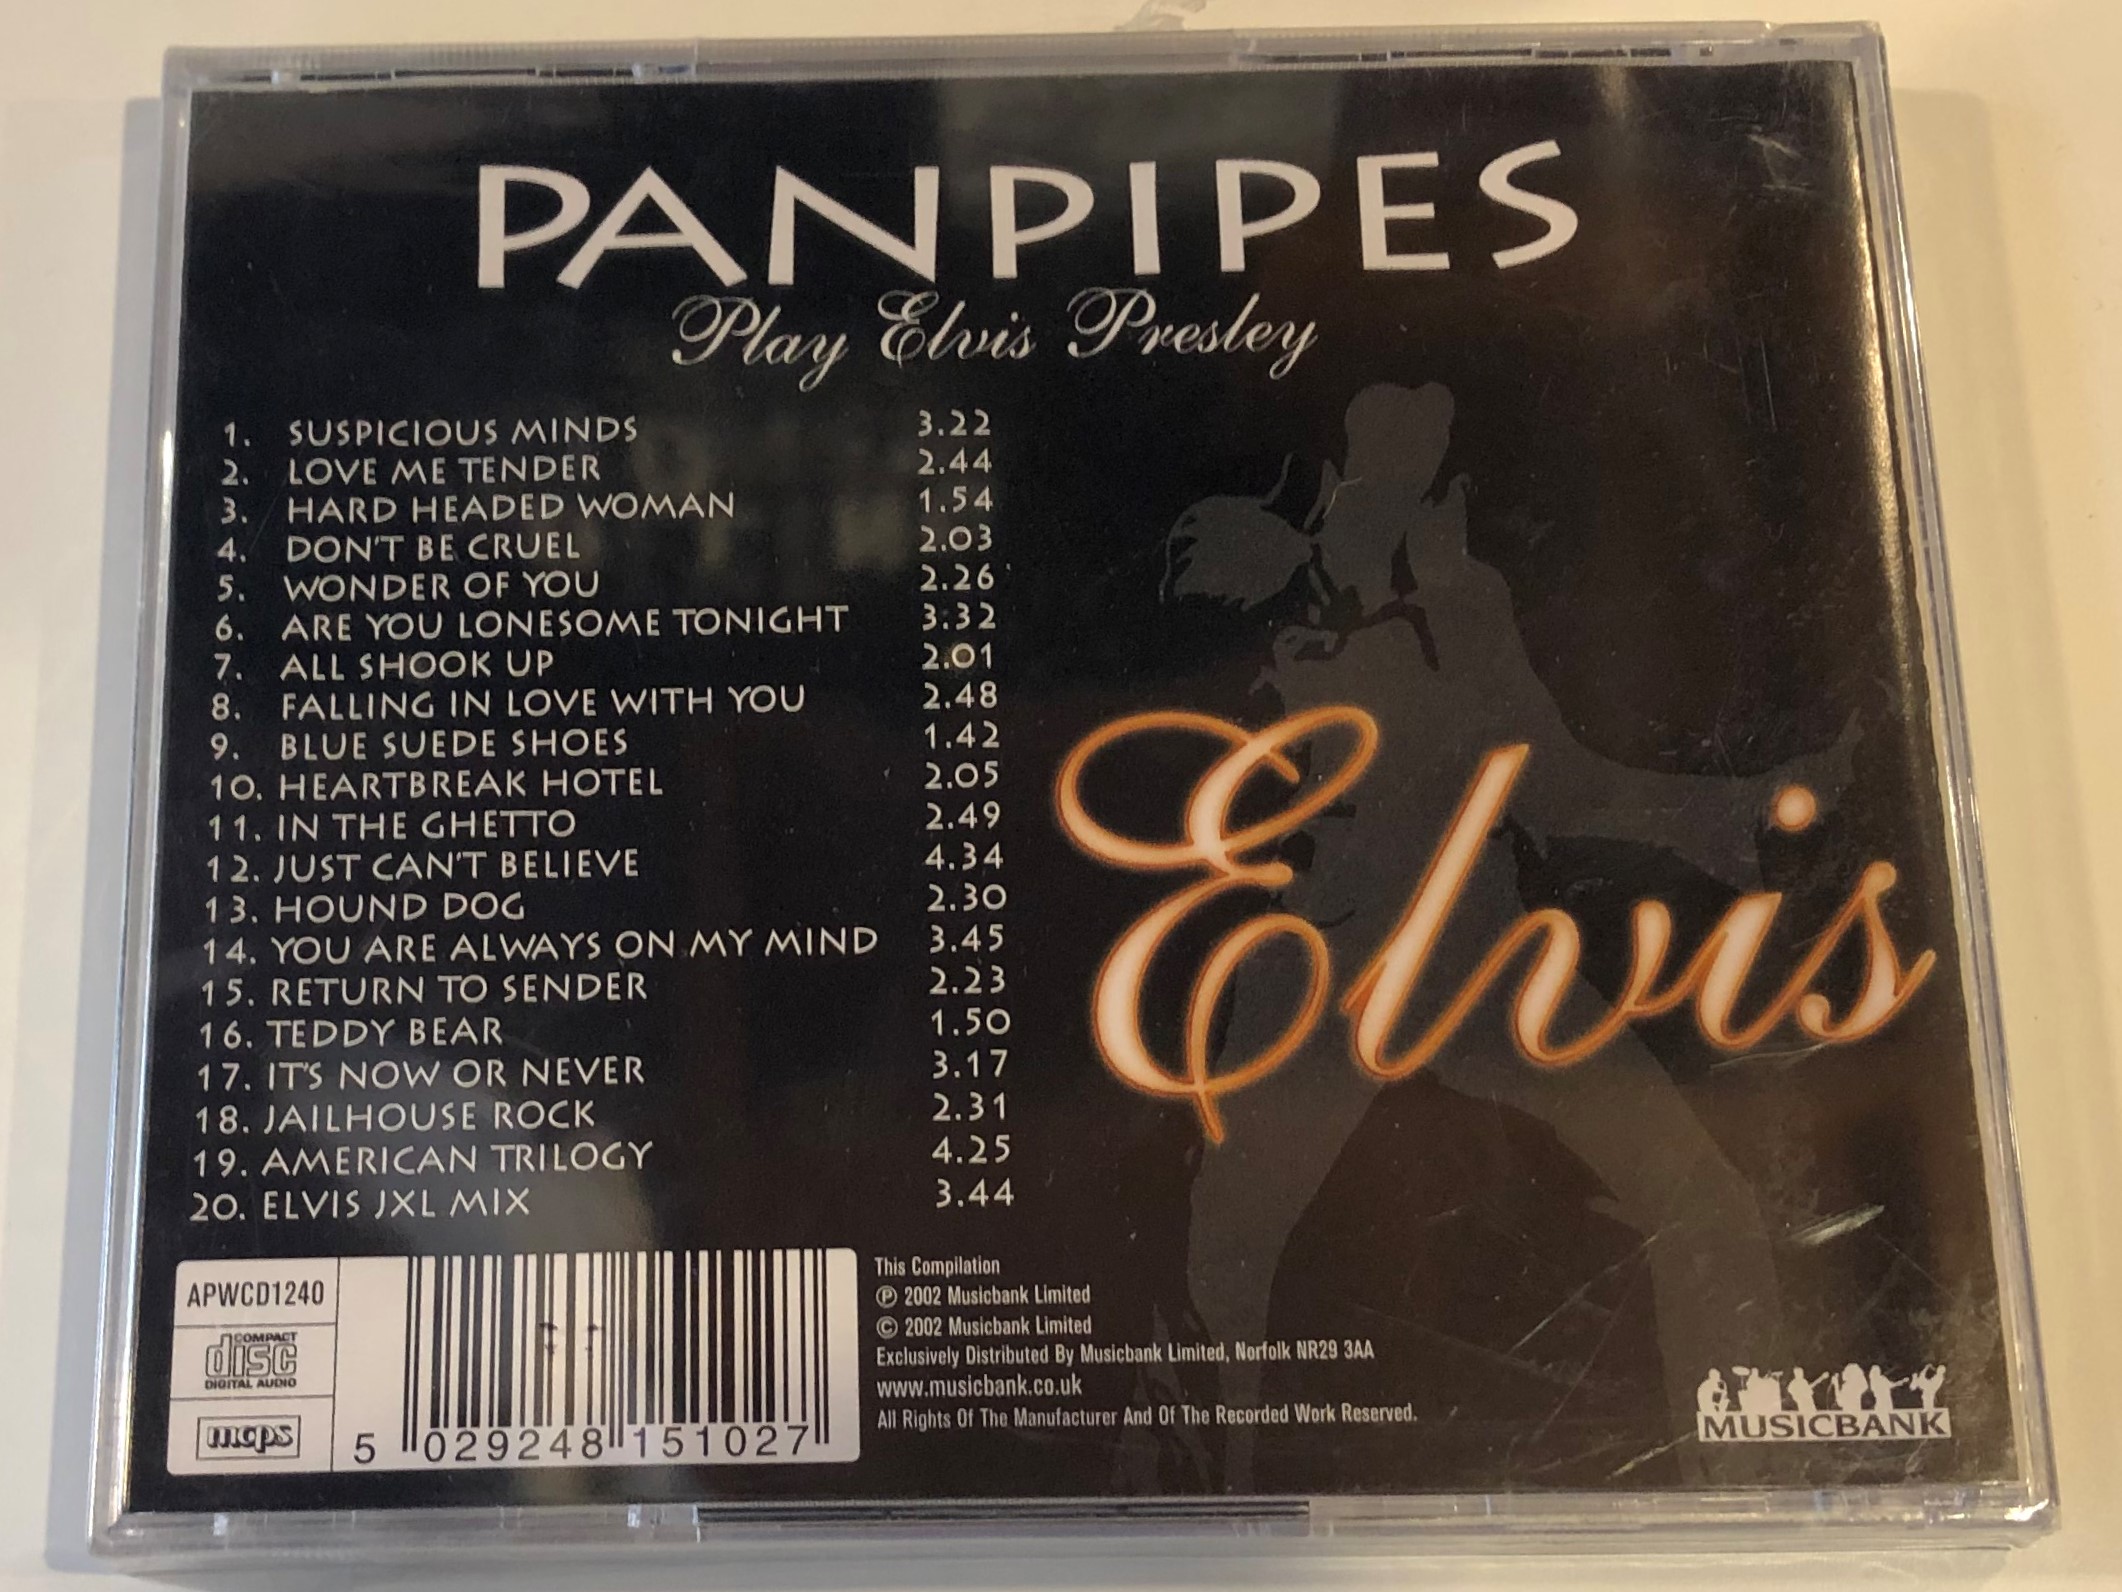 panpipes-play-elvis-presley-elvis-includes-suspicious-minds-love-me-tender-don-t-be-cruel-hound-dog-return-to-sender-jailhouse-rock-and-many-more-music-bank-audio-cd-2002-apwcd1240-1.jpg